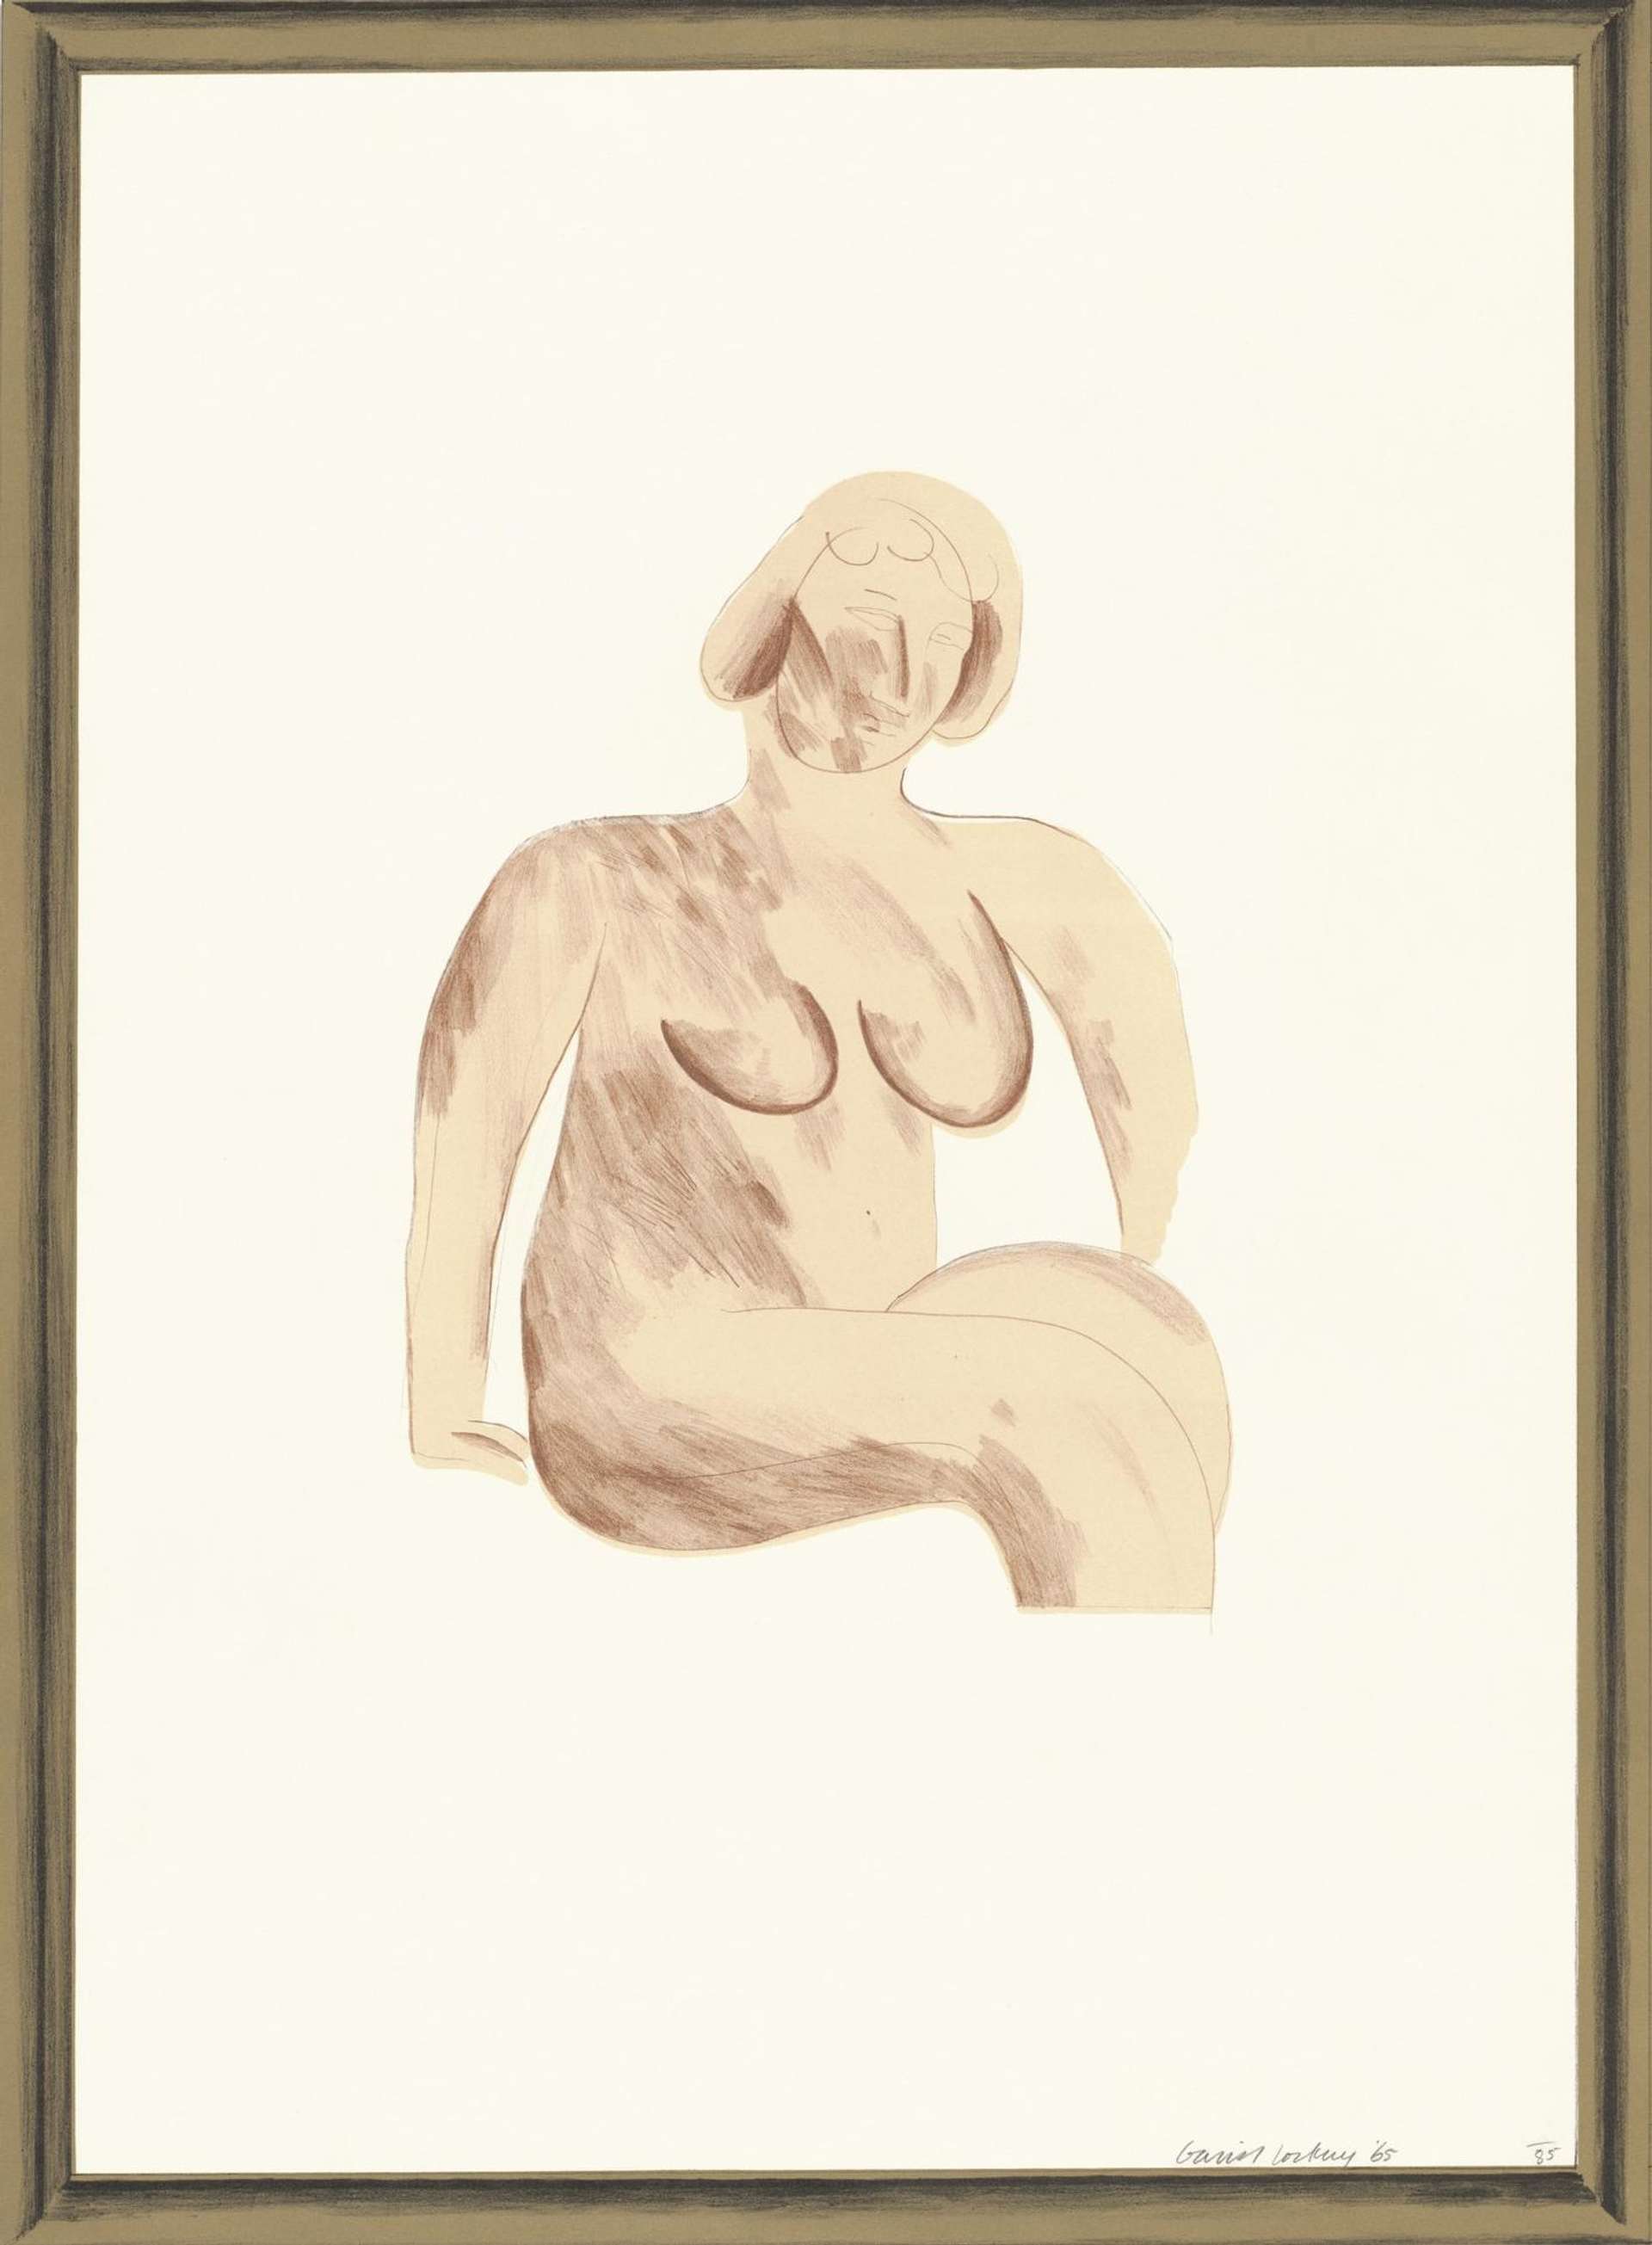 David Hockney’s Picture of A Simple Framed Traditional Nude Drawing. A lithograph of a nude woman seated with her gaze pointed down. 